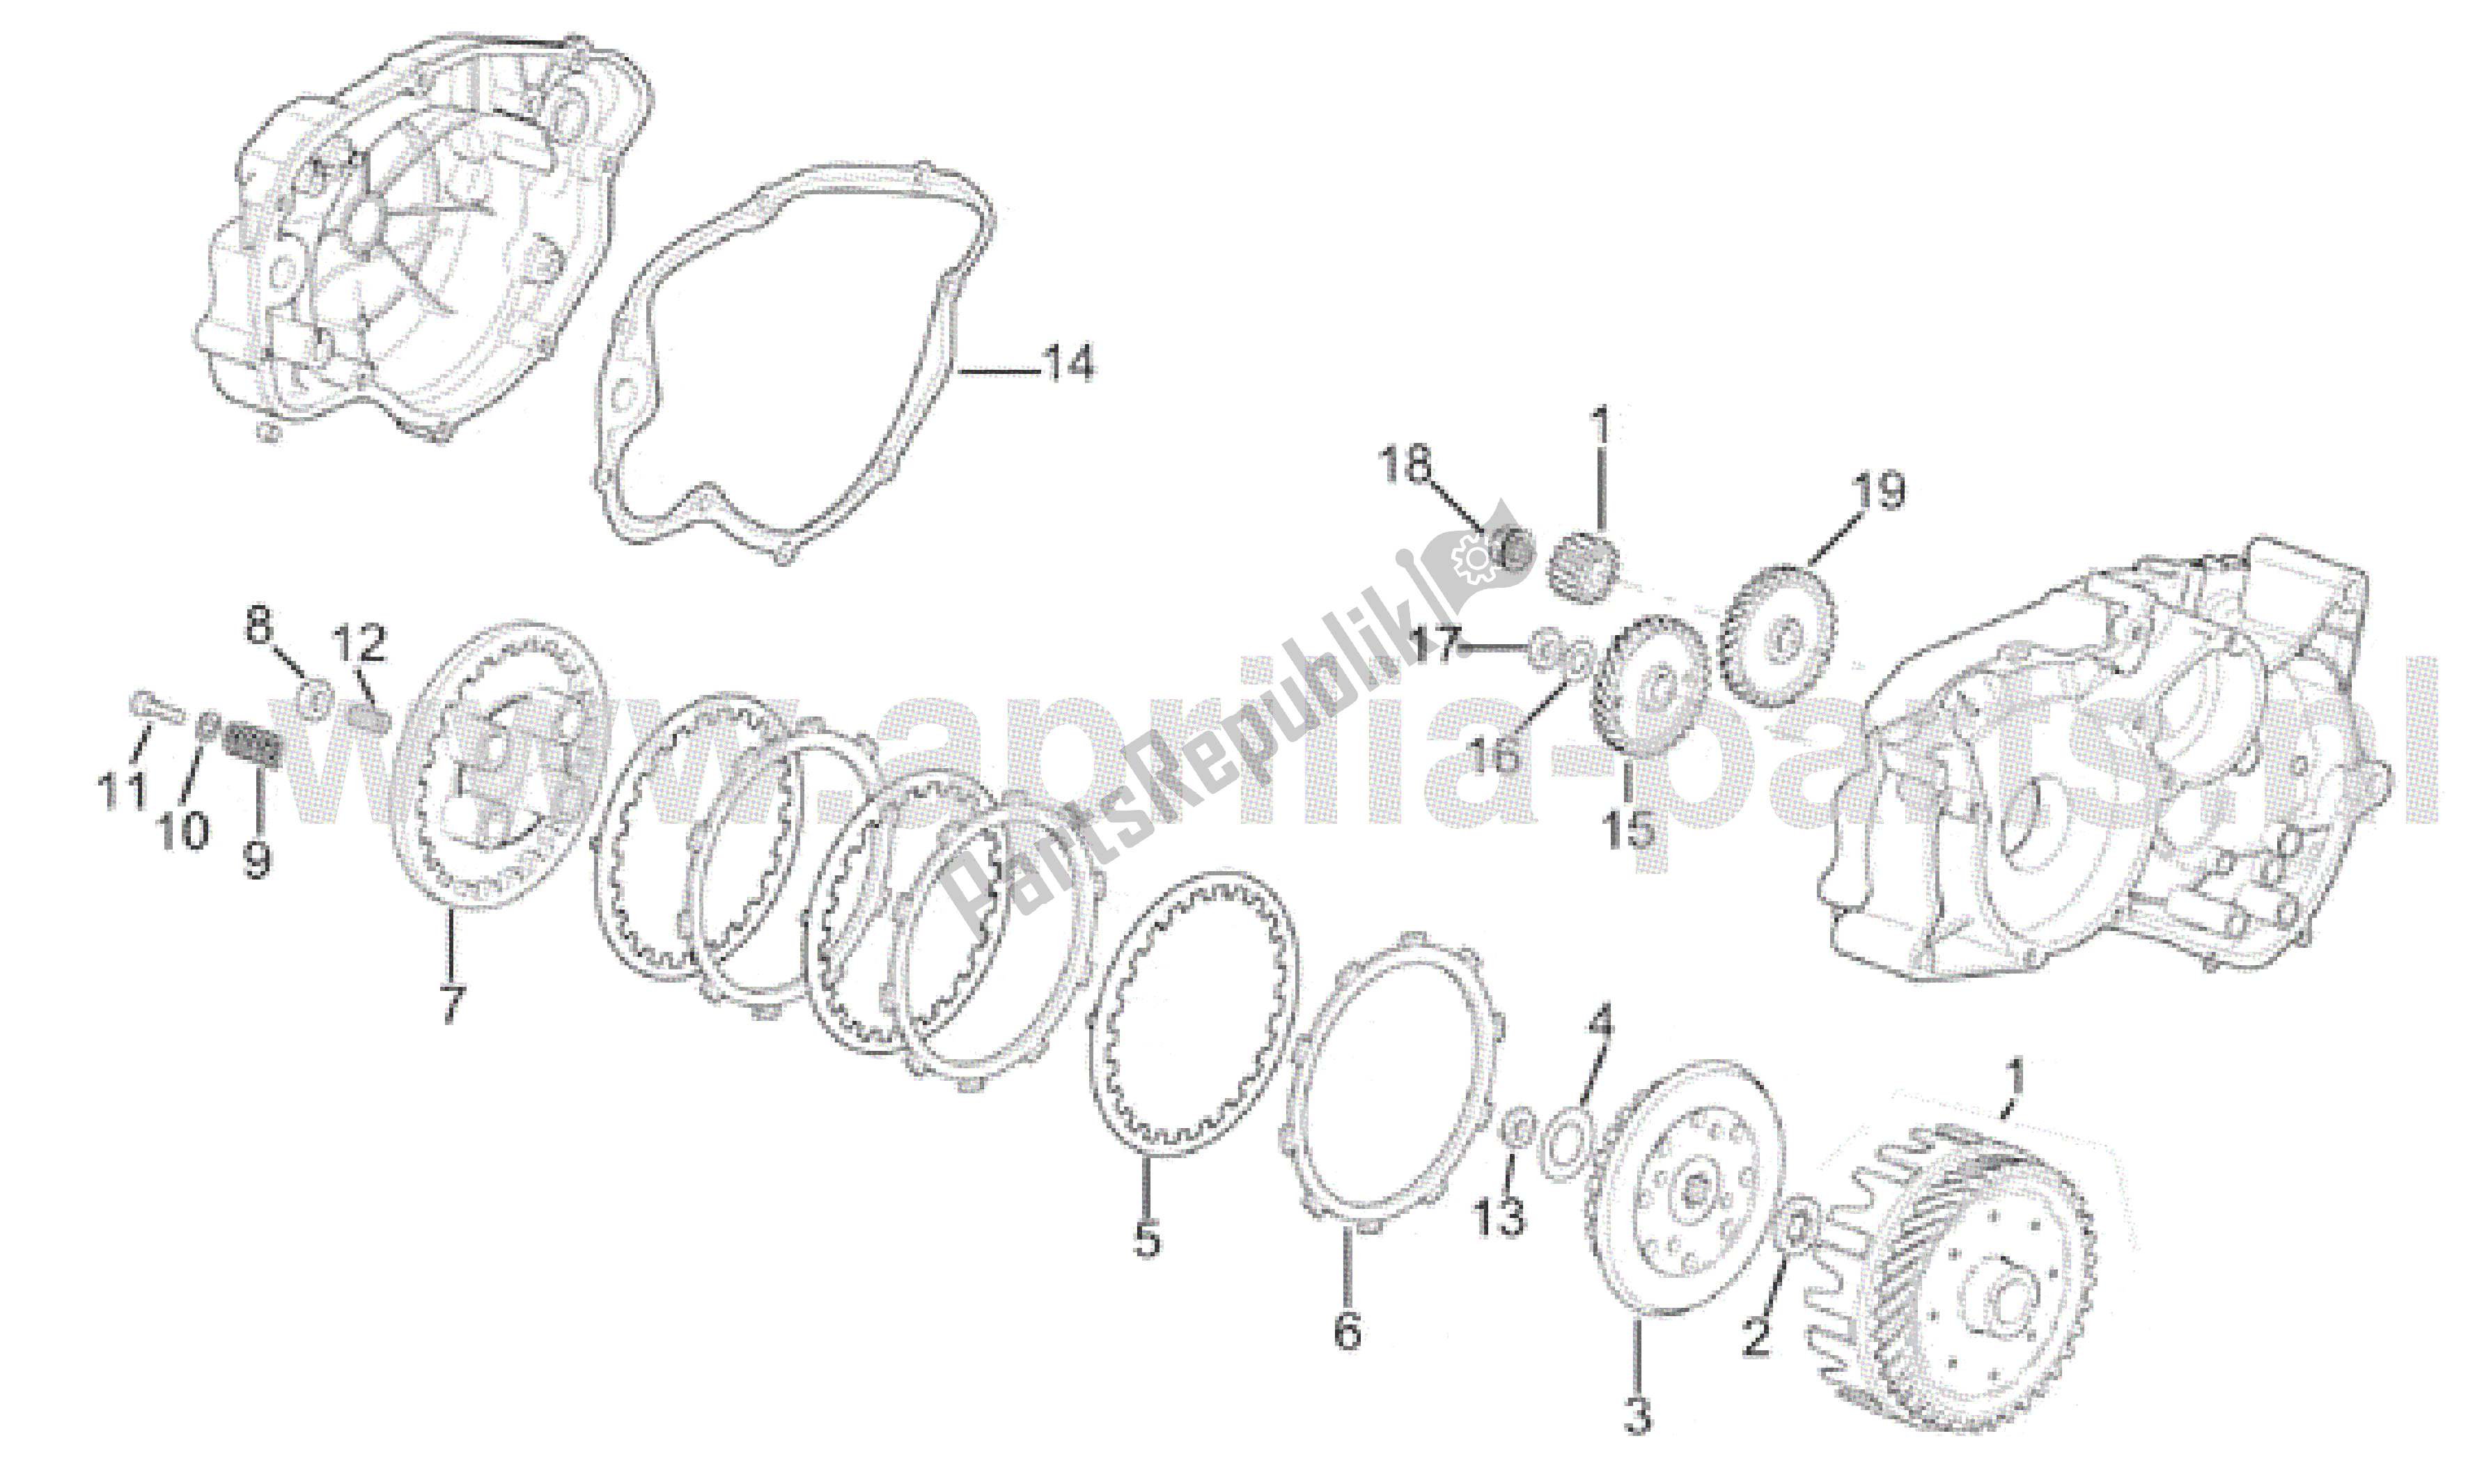 All parts for the Clutch of the Aprilia RX 50 1995 - 2000